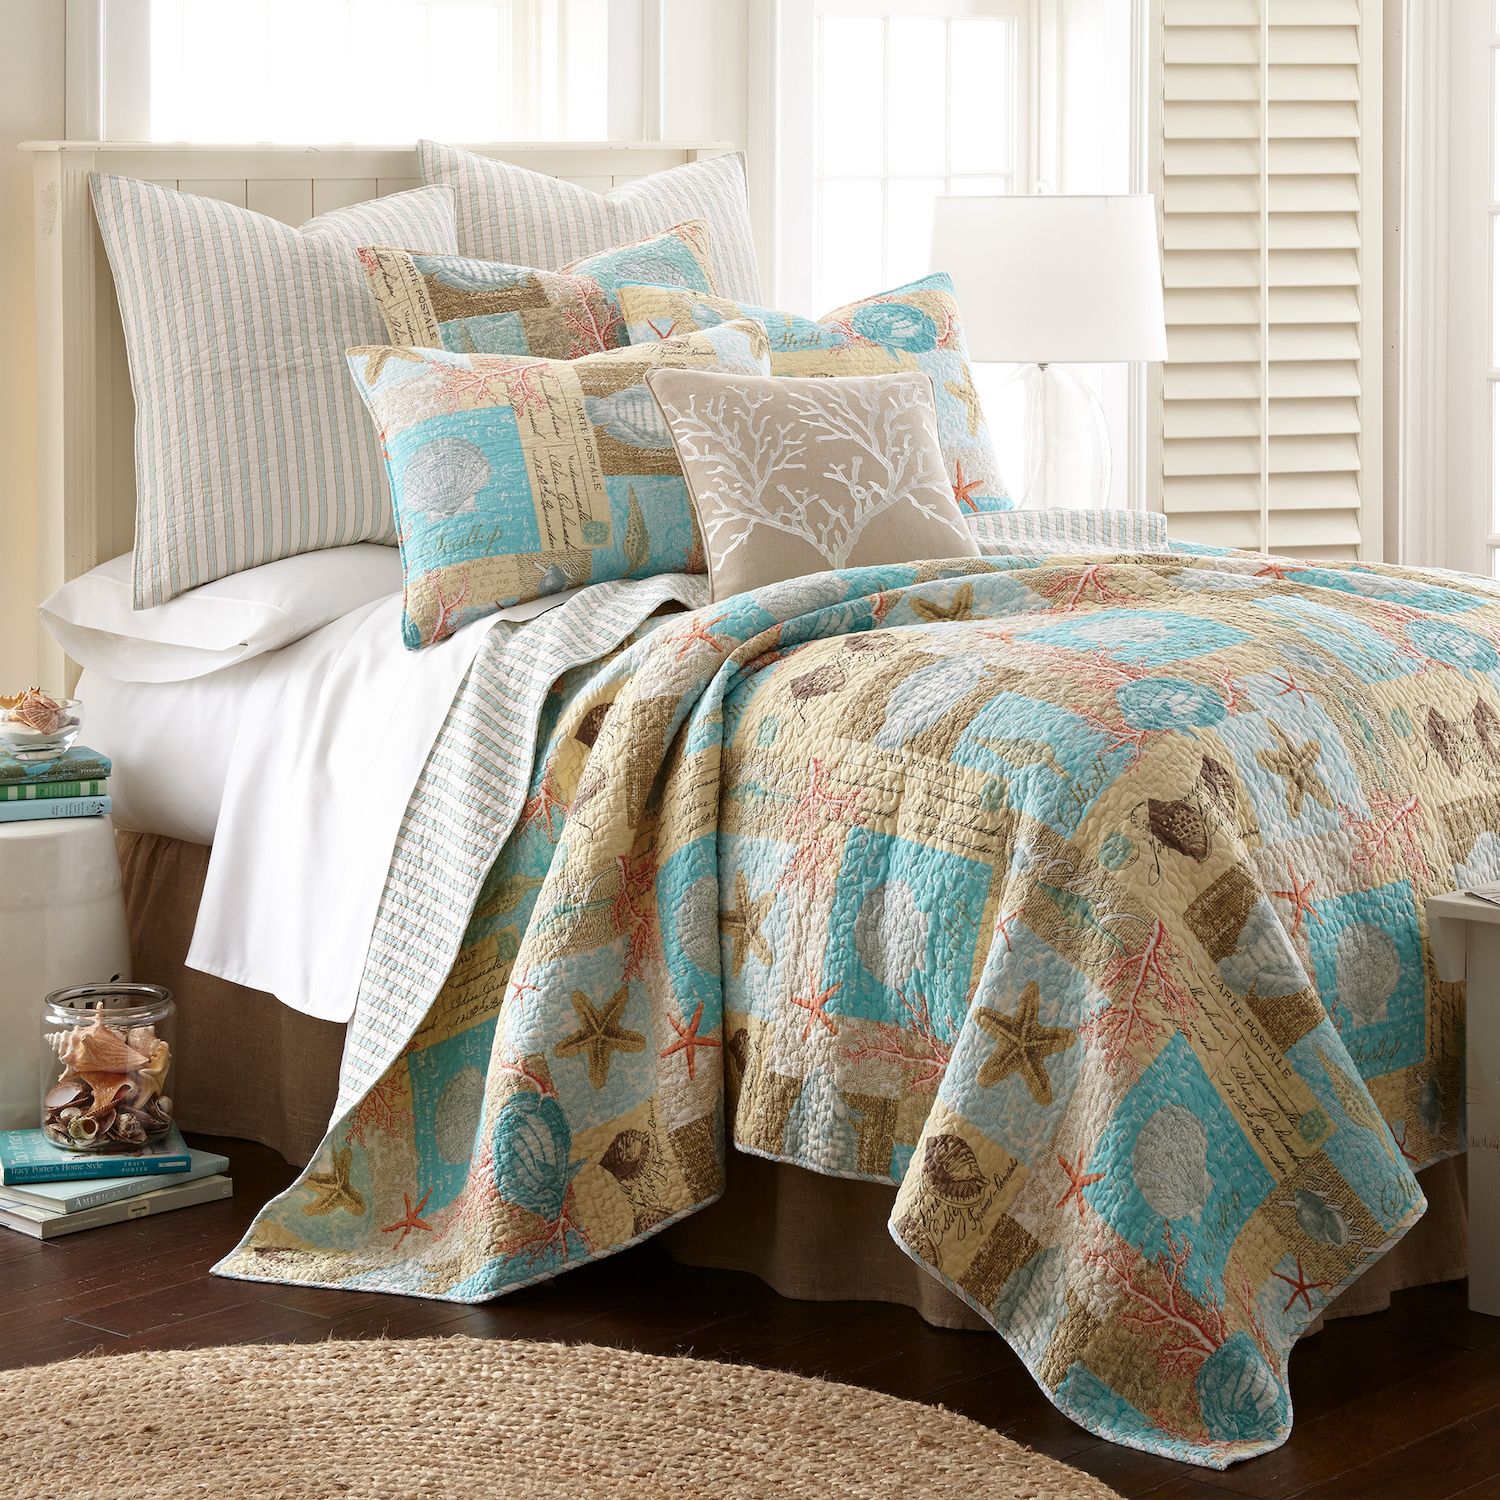 Image for Levtex Home Bahamas Reversible Quilt or Shams at Kohl's.